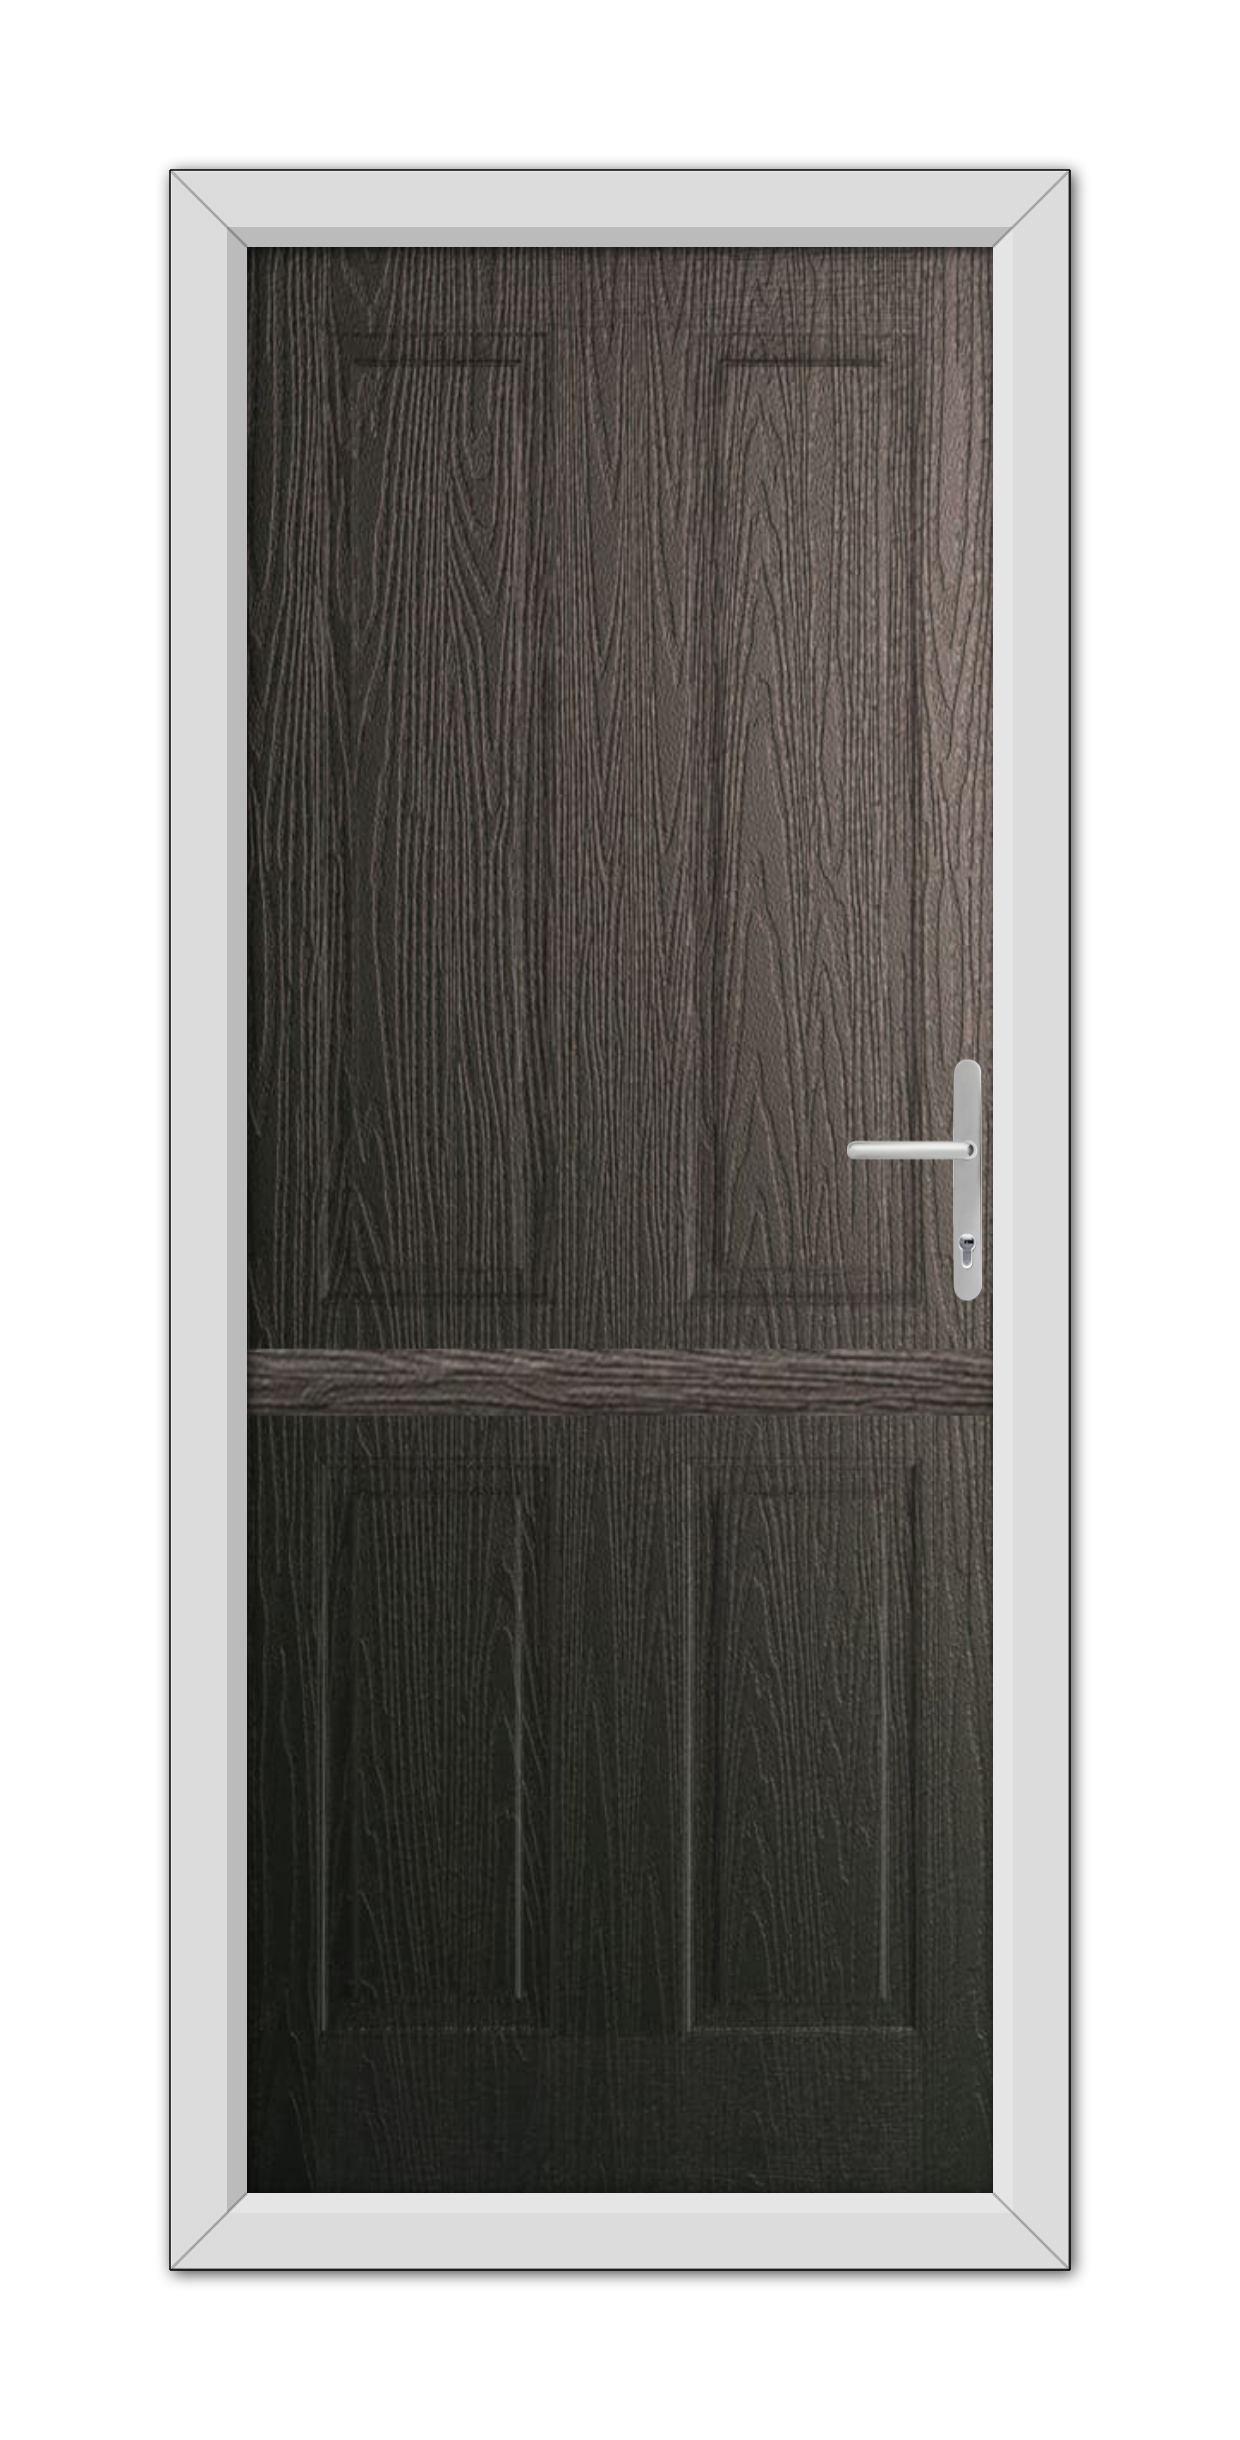 A modern Schwarzbraun Whitmore Solid Stable Composite Door 48mm Timber Core with a horizontal handle and a white frame set against a plain white background.